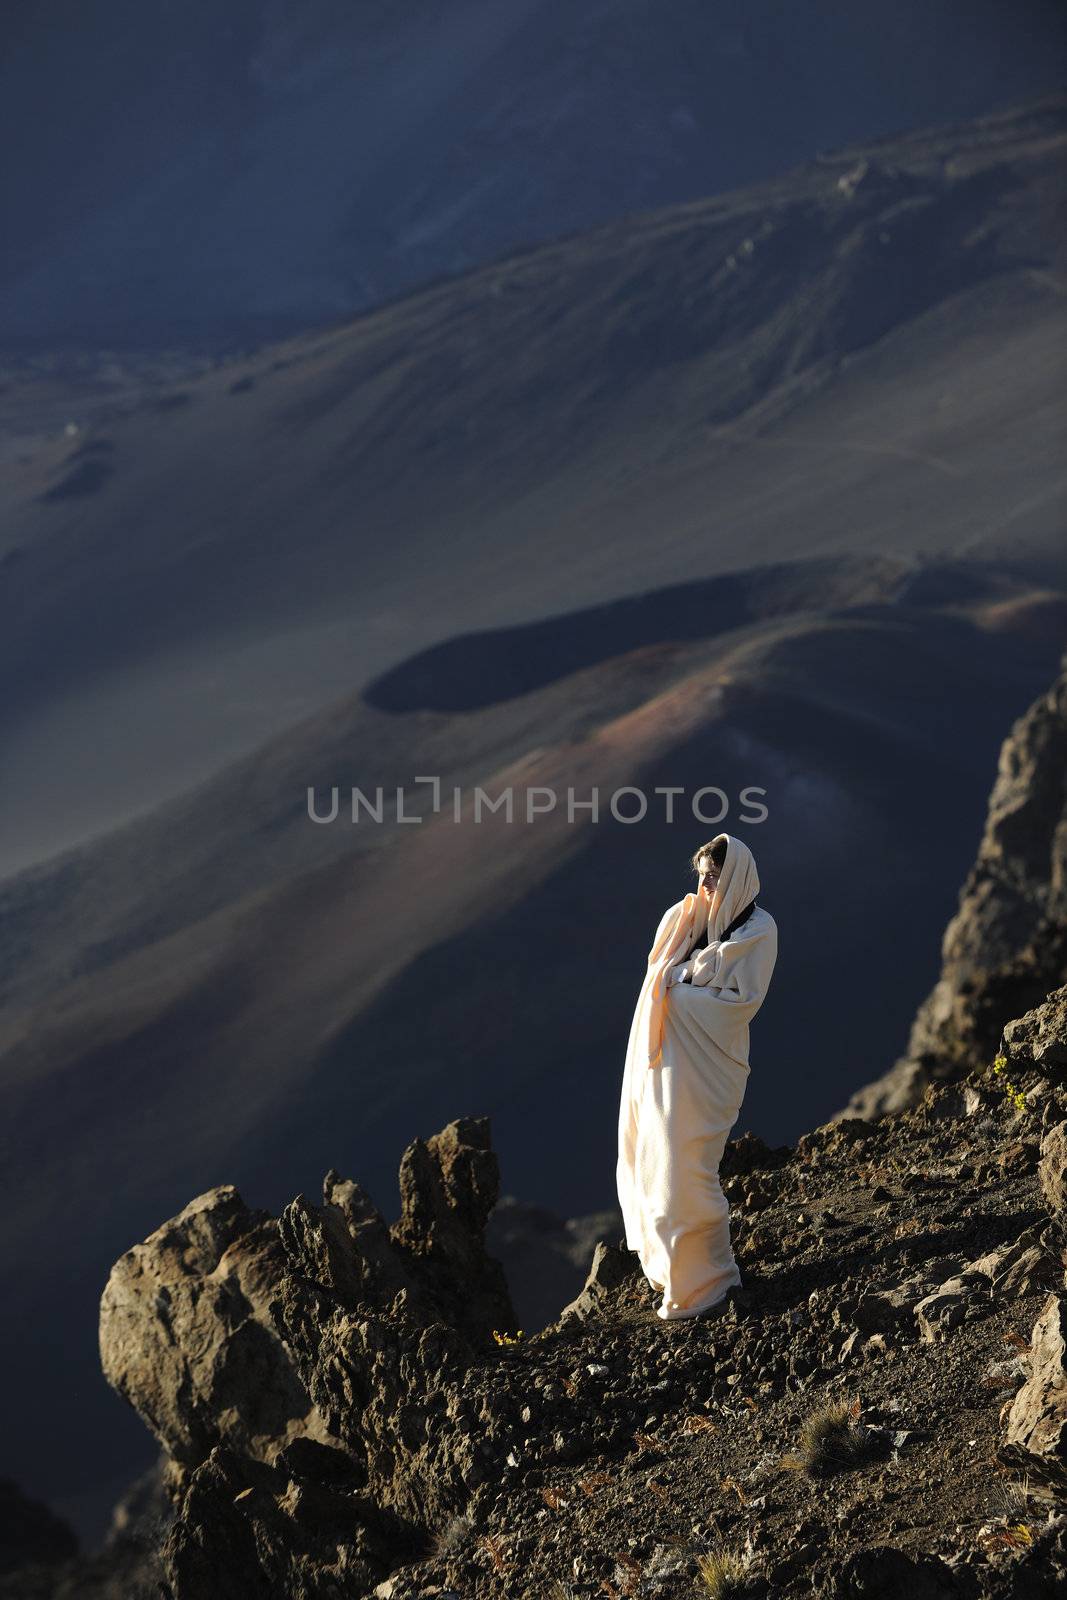 The girl at craters of Haleakala. Early morning, a smoke, wrapped up in white the girl in rising sun beams costs at edge of breakage against craters.